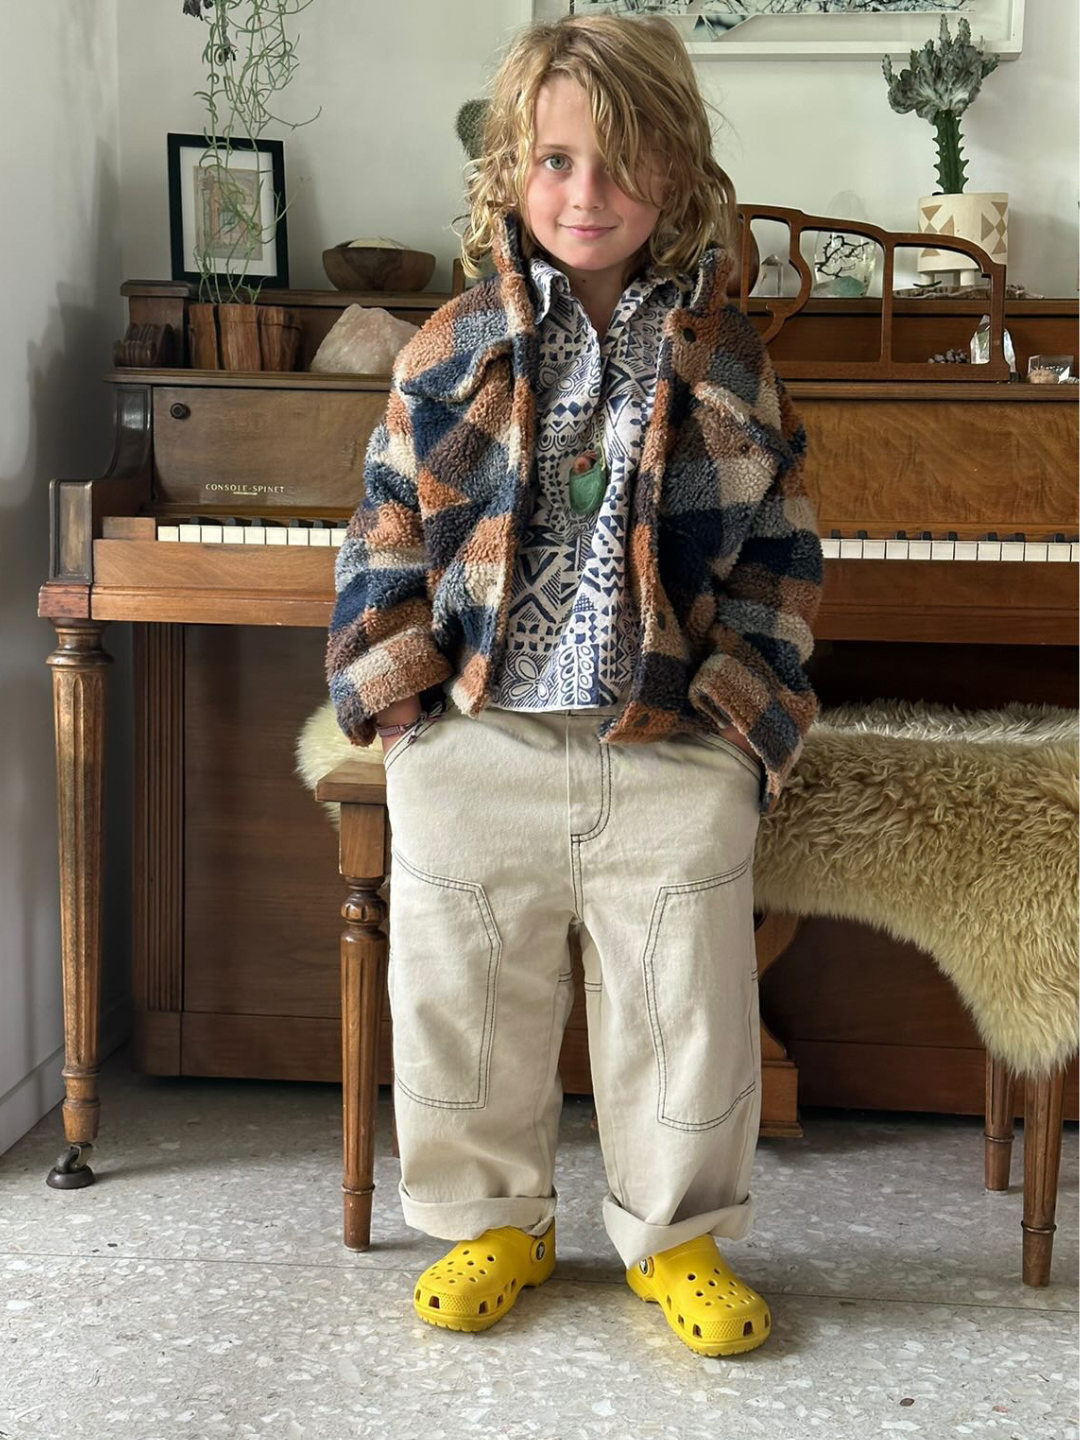 Stone | A Child is wearing Stone Stitch Jean with fuzzy checkered jacket, printed shirt, and yellow crocs. 